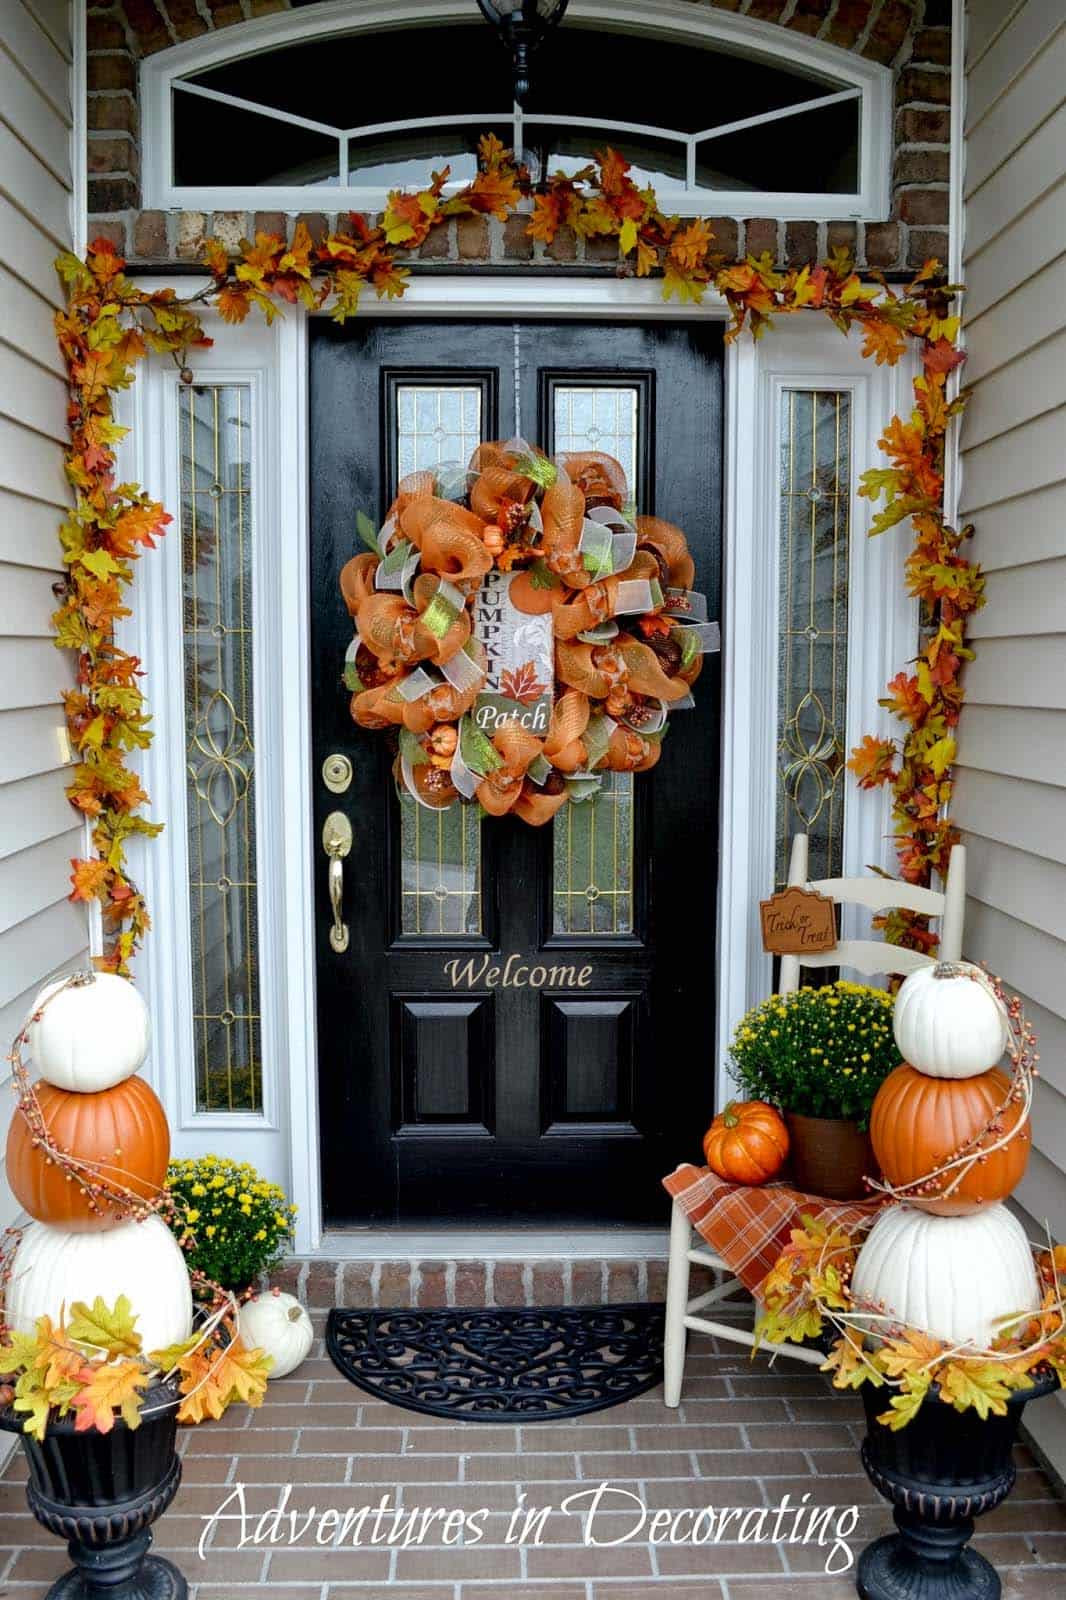 Outdoor Fall Decorating Ideas
 46 of the Coziest Ways to Decorate your Outdoor Spaces for